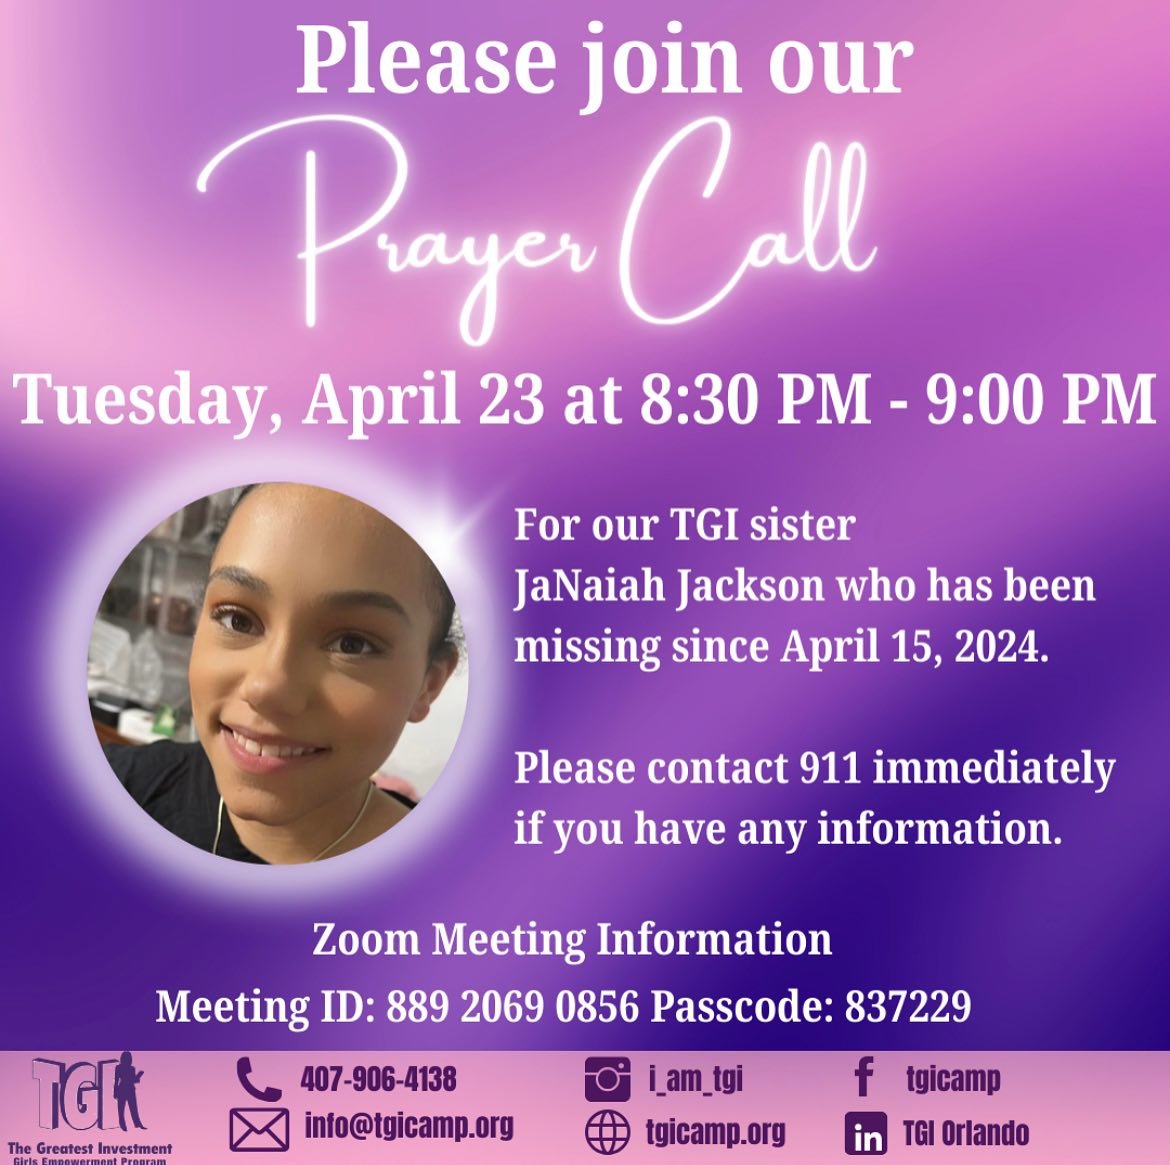 Please join our Prayer Call for JaNaiah Jackson who went missing last Monday, April 15. 

We are praying that our beautiful TGI sister will be found soon and safe. Join us as we lift JaNaiah and her family in prayer.

TGI is inviting you to a schedul